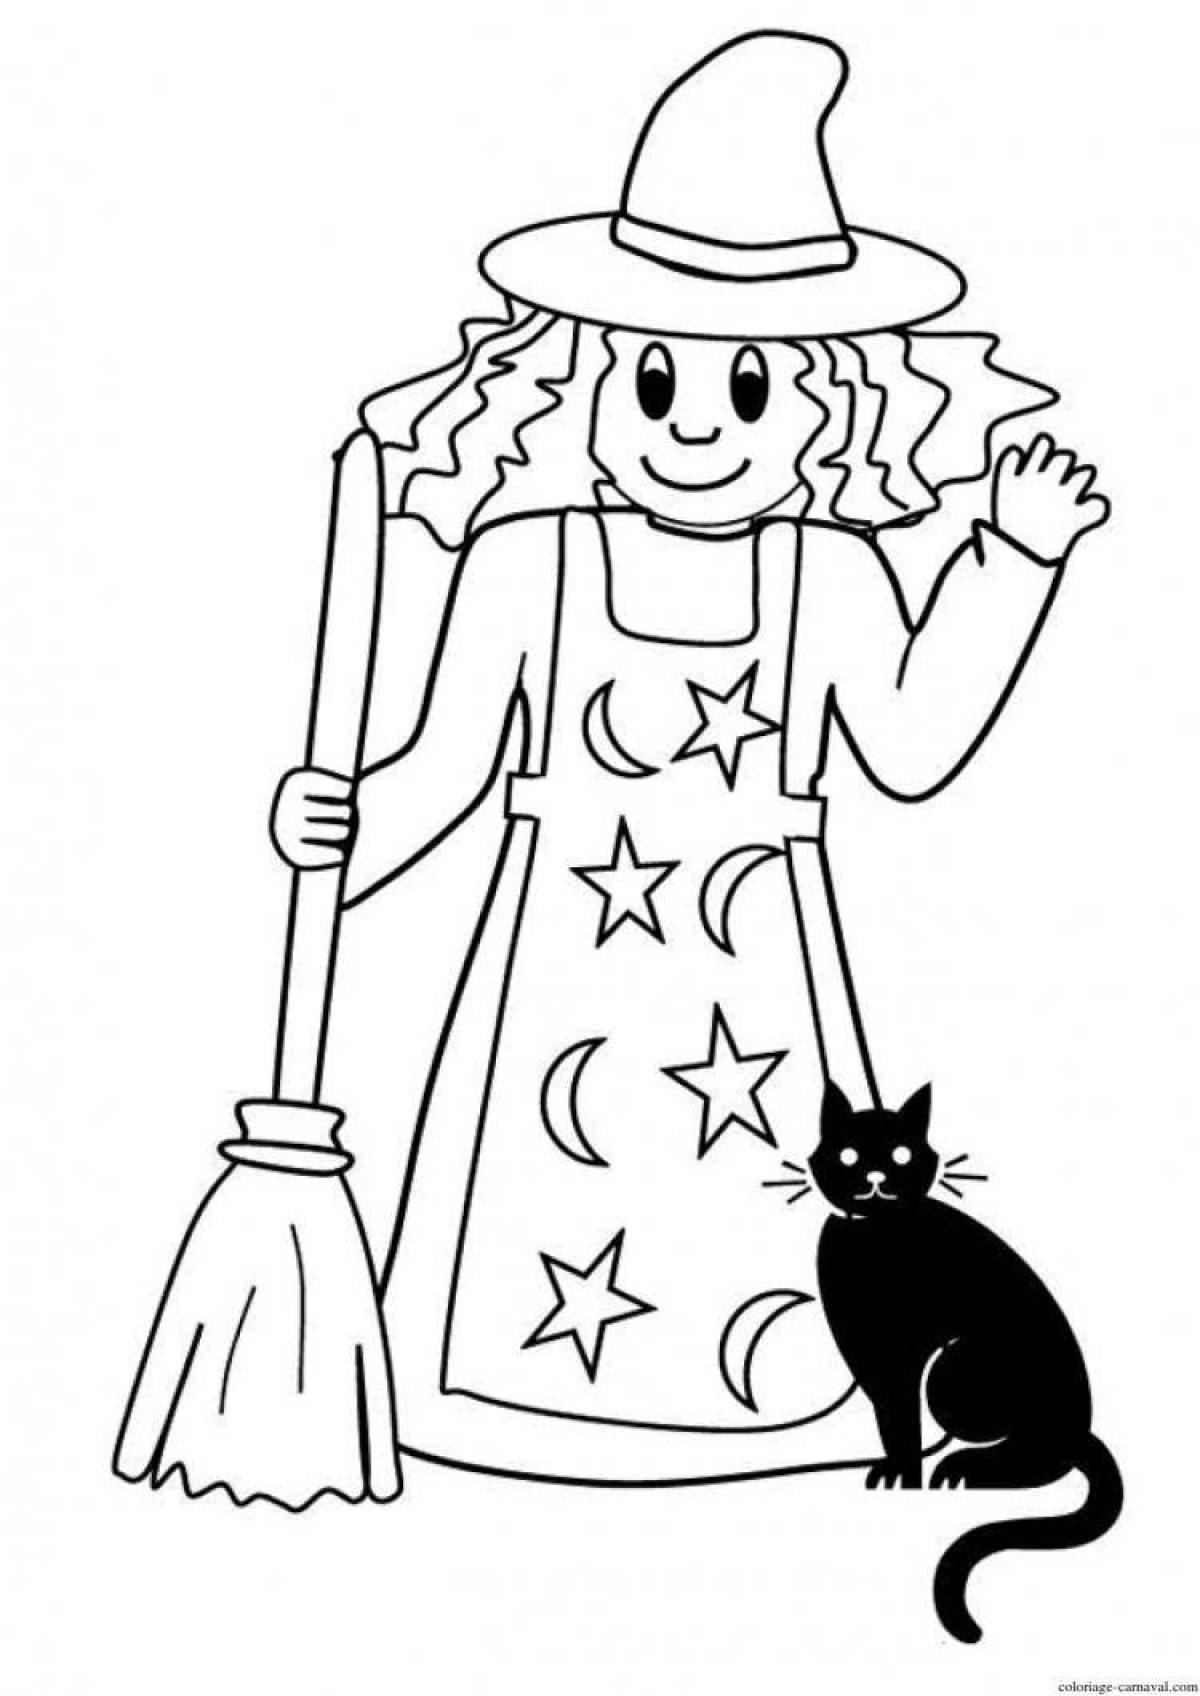 Cute aya and witch coloring book